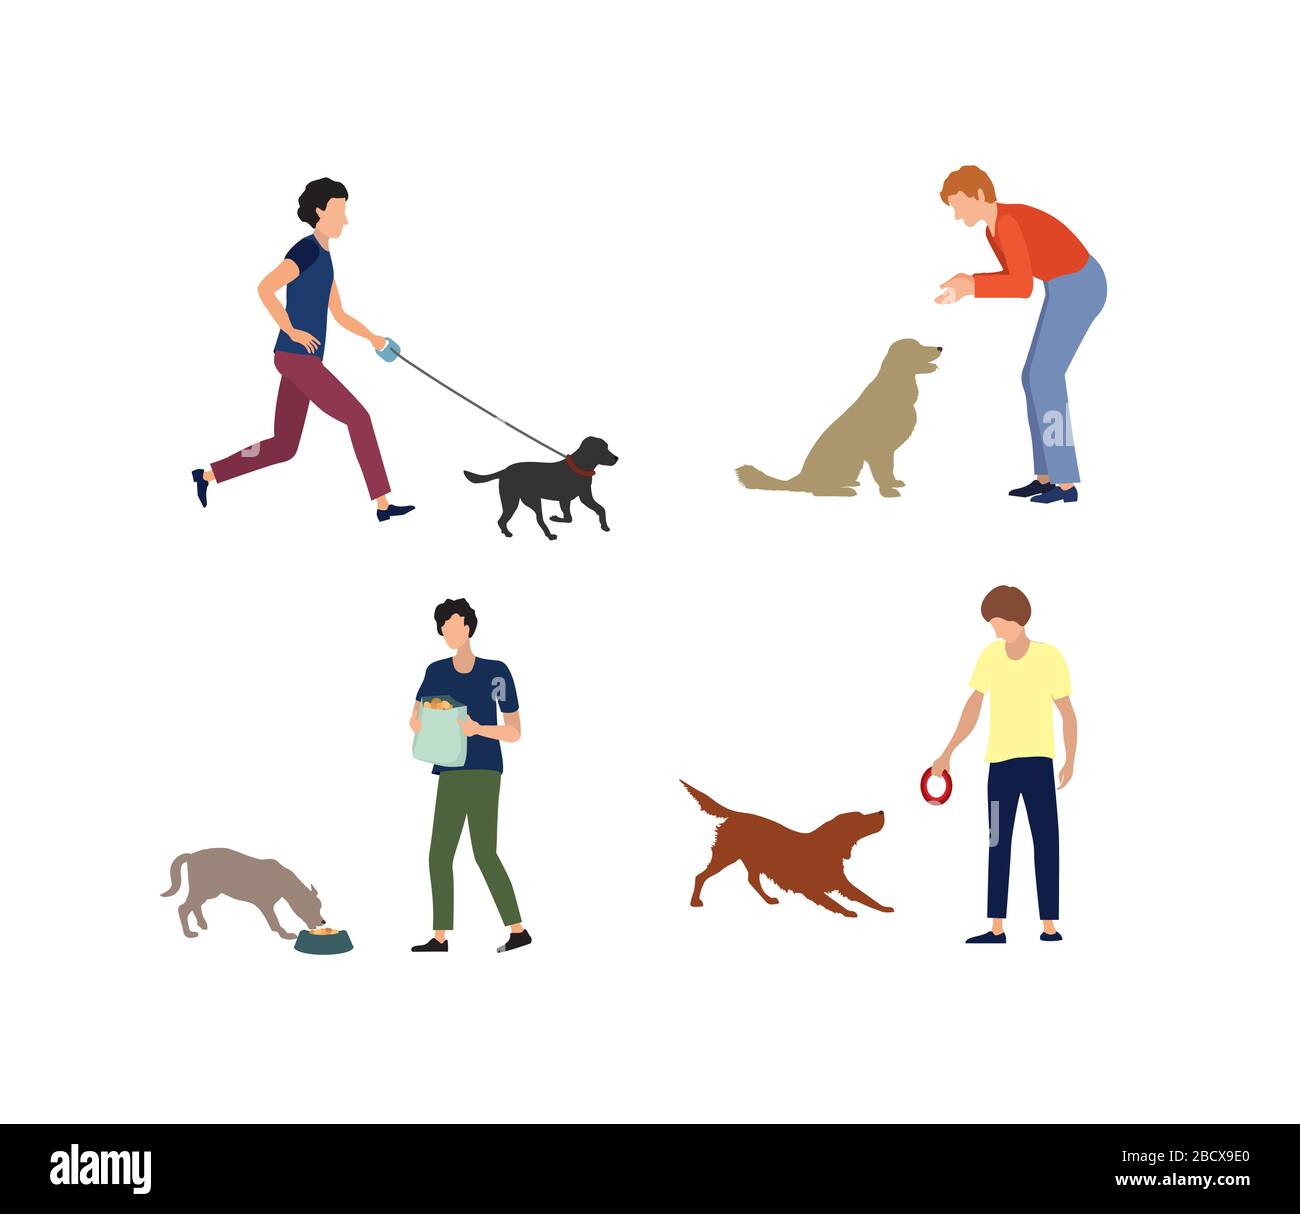 Set of people with dogs. Dog and person. Day care of dogs - feeding, walking, playing with puppy. Stock Vector